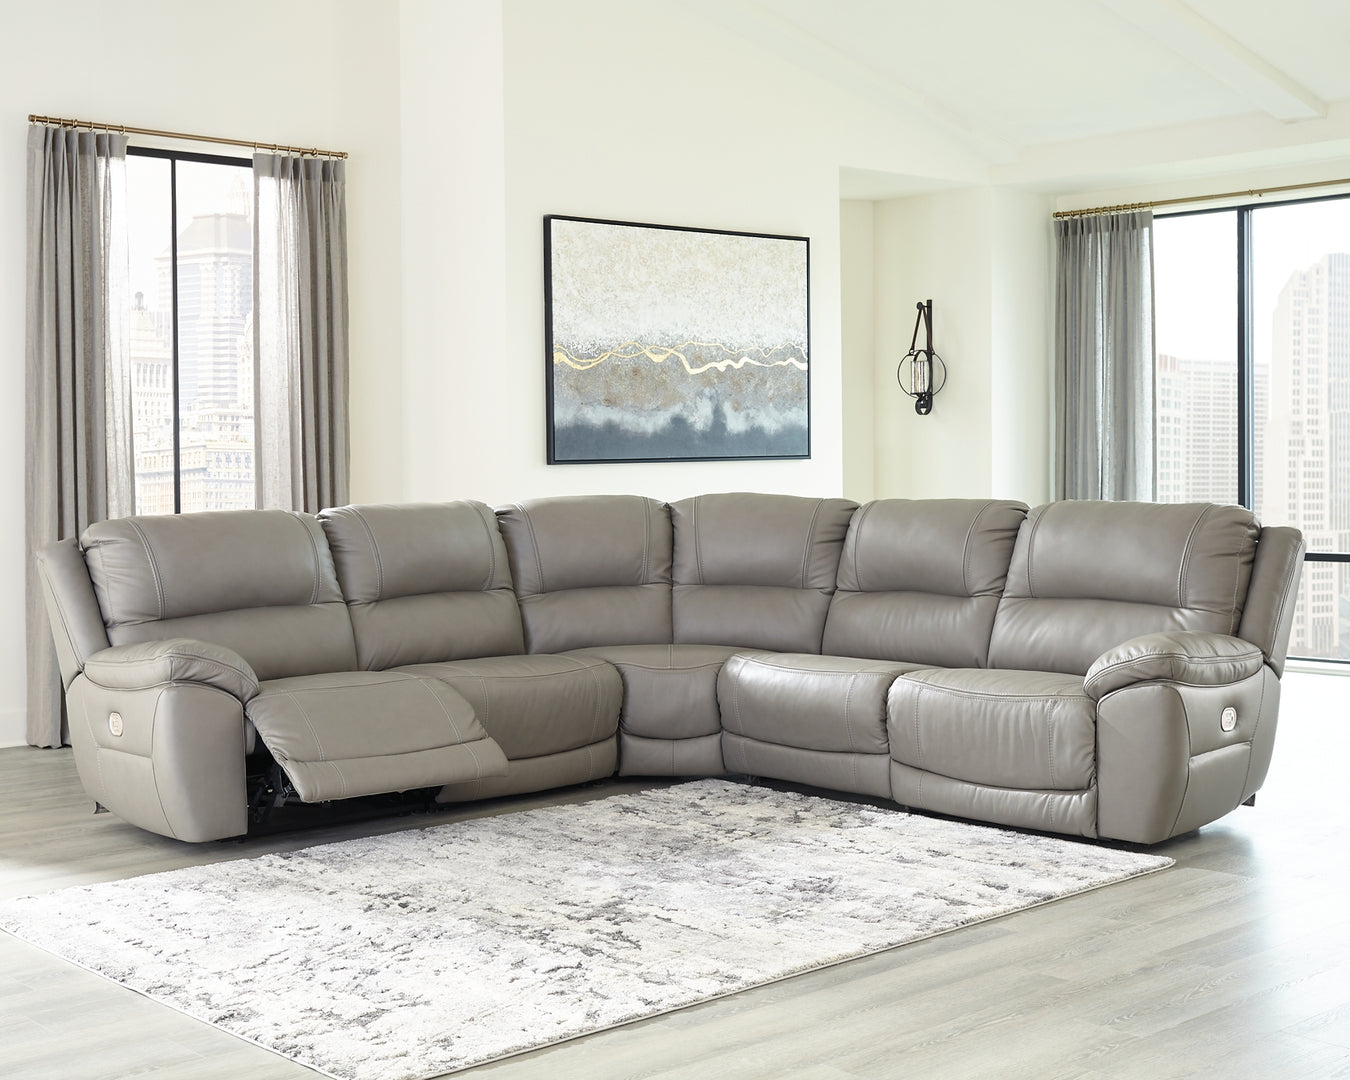 Living Room > Reclining Furniture > Reclining Sectional